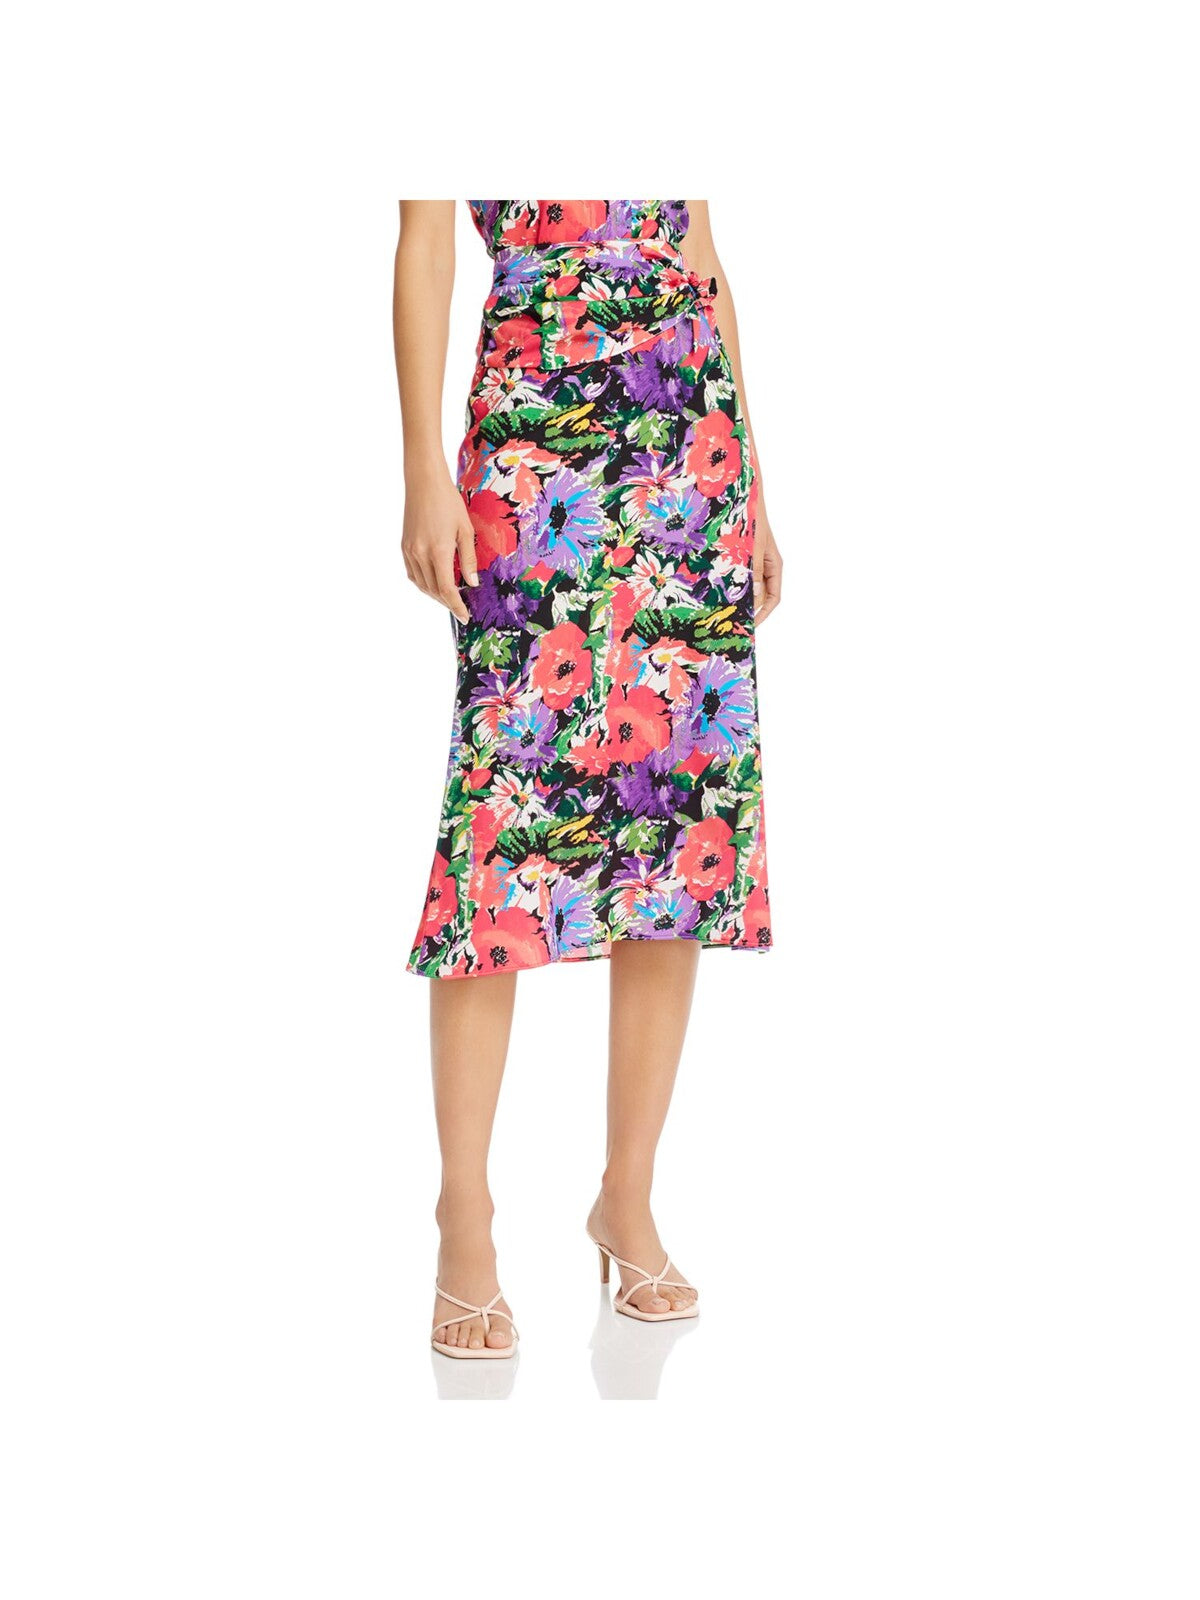 ART DEALER Womens Black Gathered Tie Floral Midi Party A-Line Skirt XS